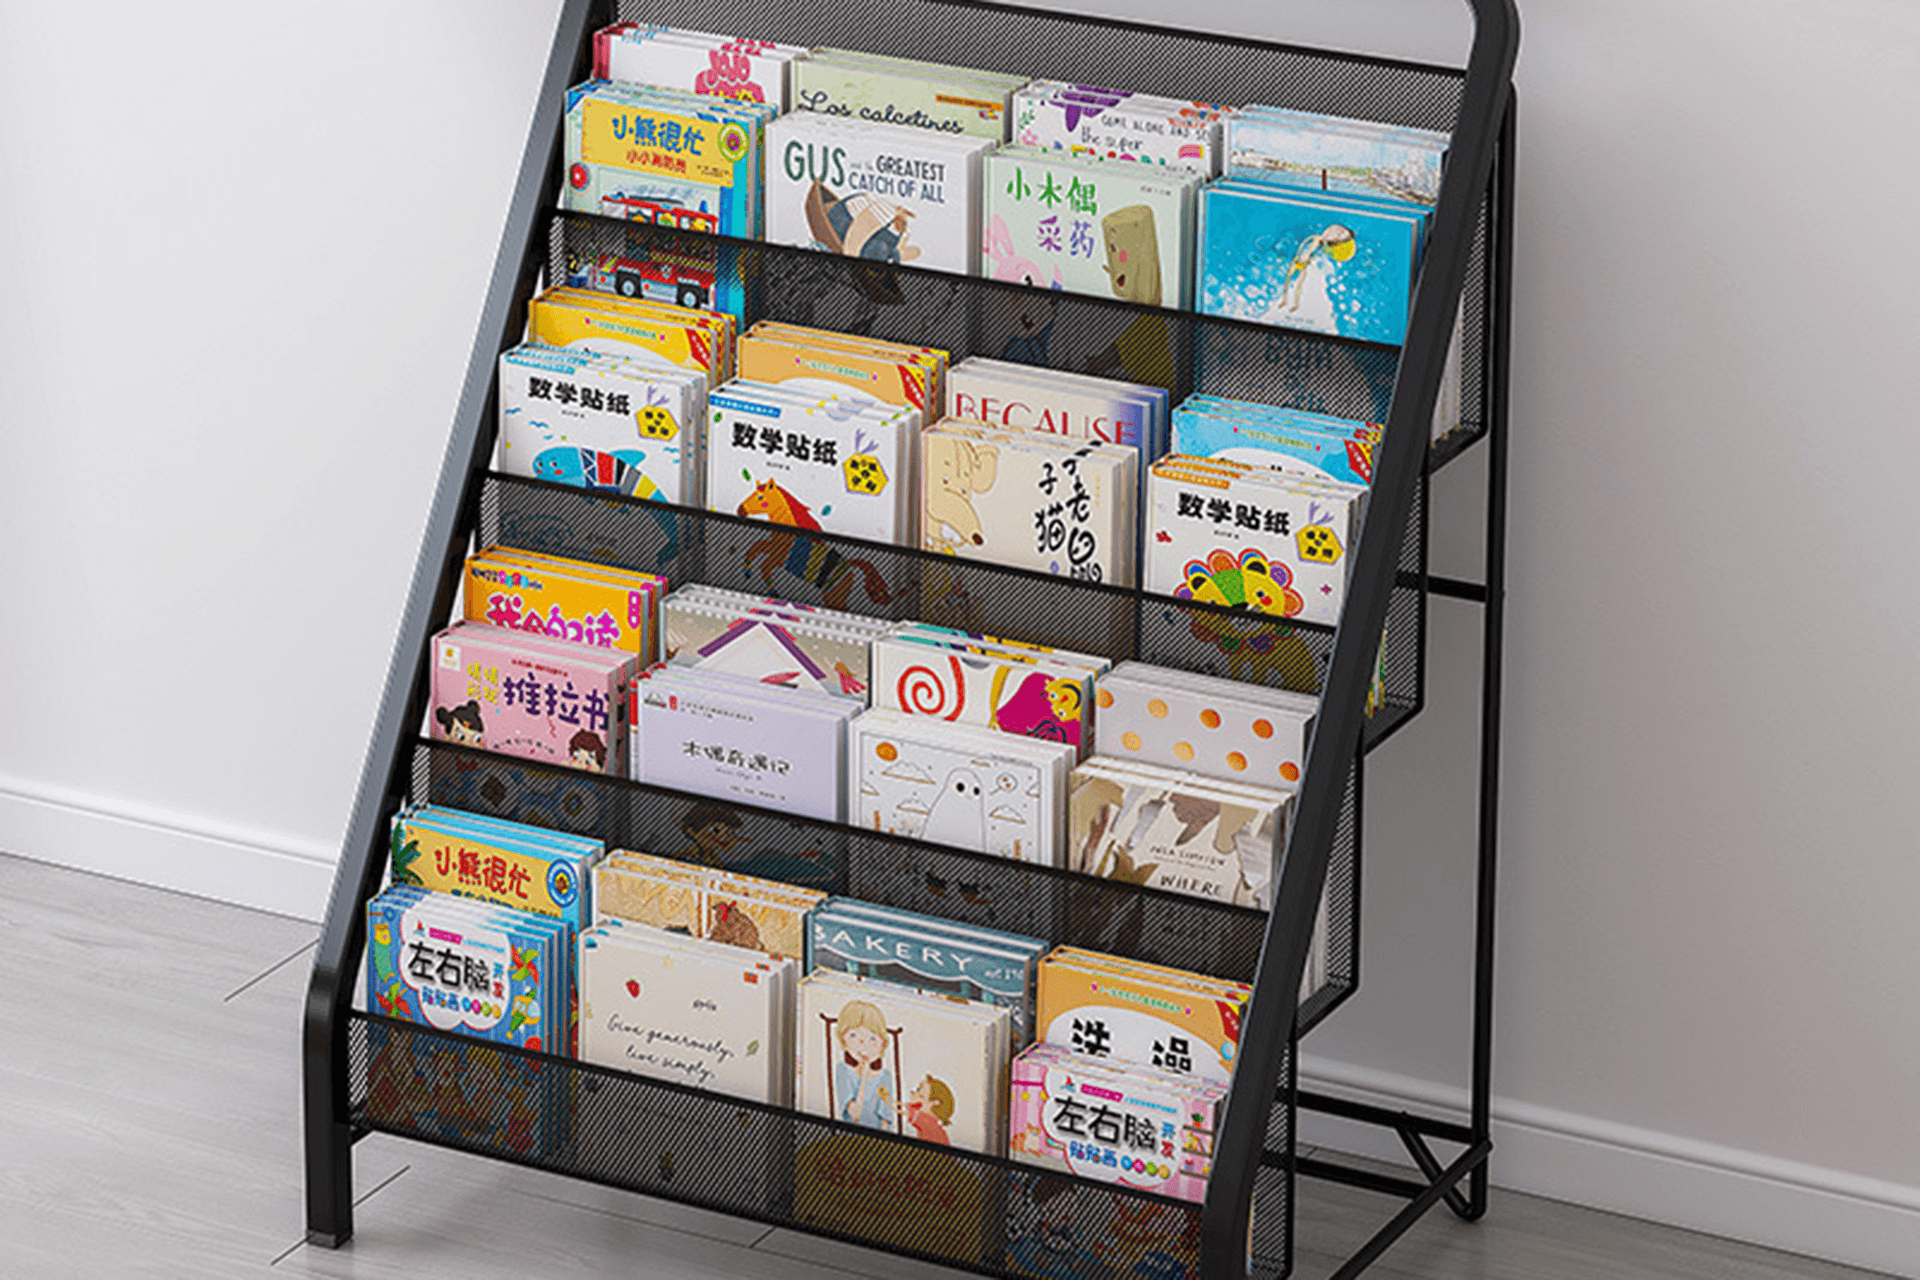 A Magazine Display Shelf That Lights Up The Reading Corner And Creates A Perfect Reading Environment